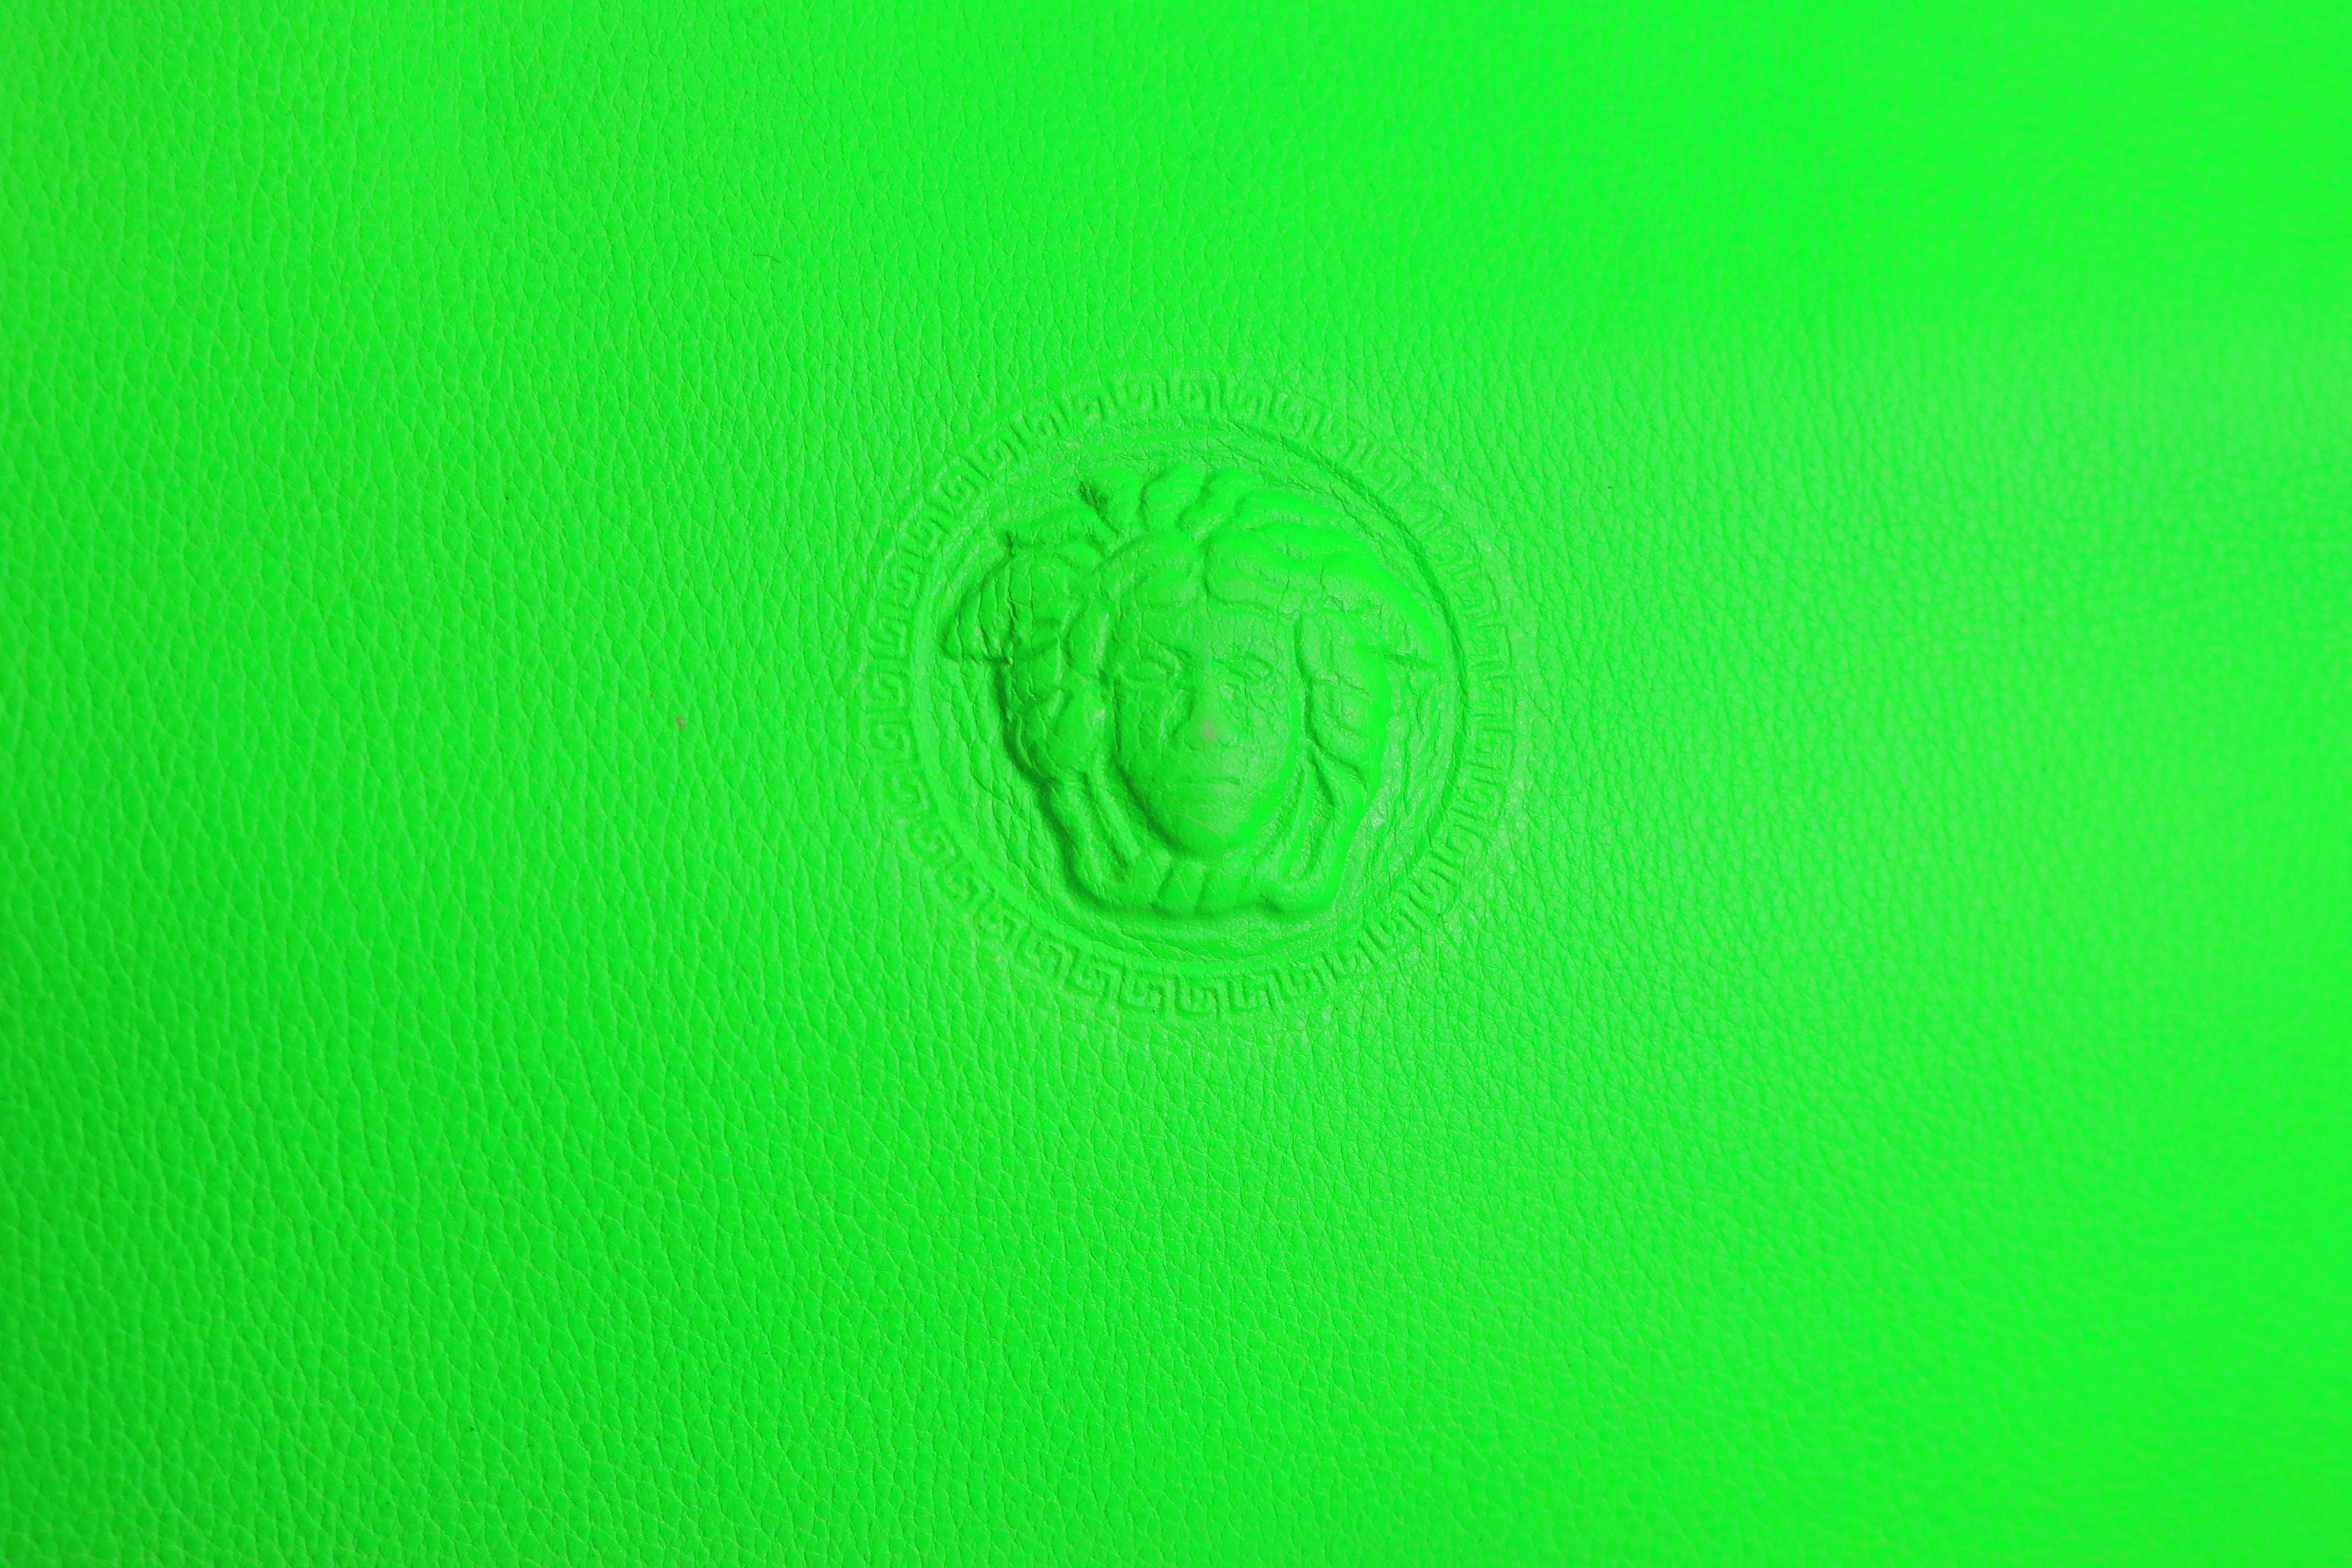 - Vintage 90s Gianni Versace Couture neon green leather bag with iconic Medusa logo. 

- Made in Italy. 

- Length: 11in, Height: 9.5, Handle height: 4in, Width: 3.5in (measurements are approximate). 

- Condition: Never been used before but some